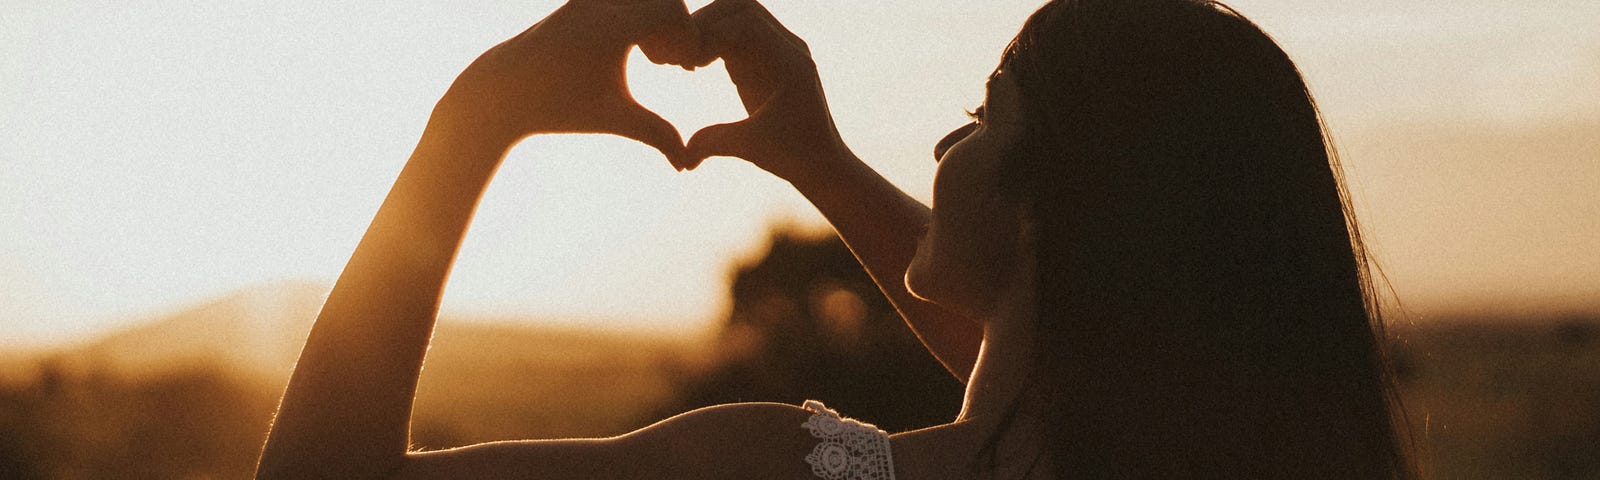 A woman holding her hands in the shape of a heart raised to the sunset.